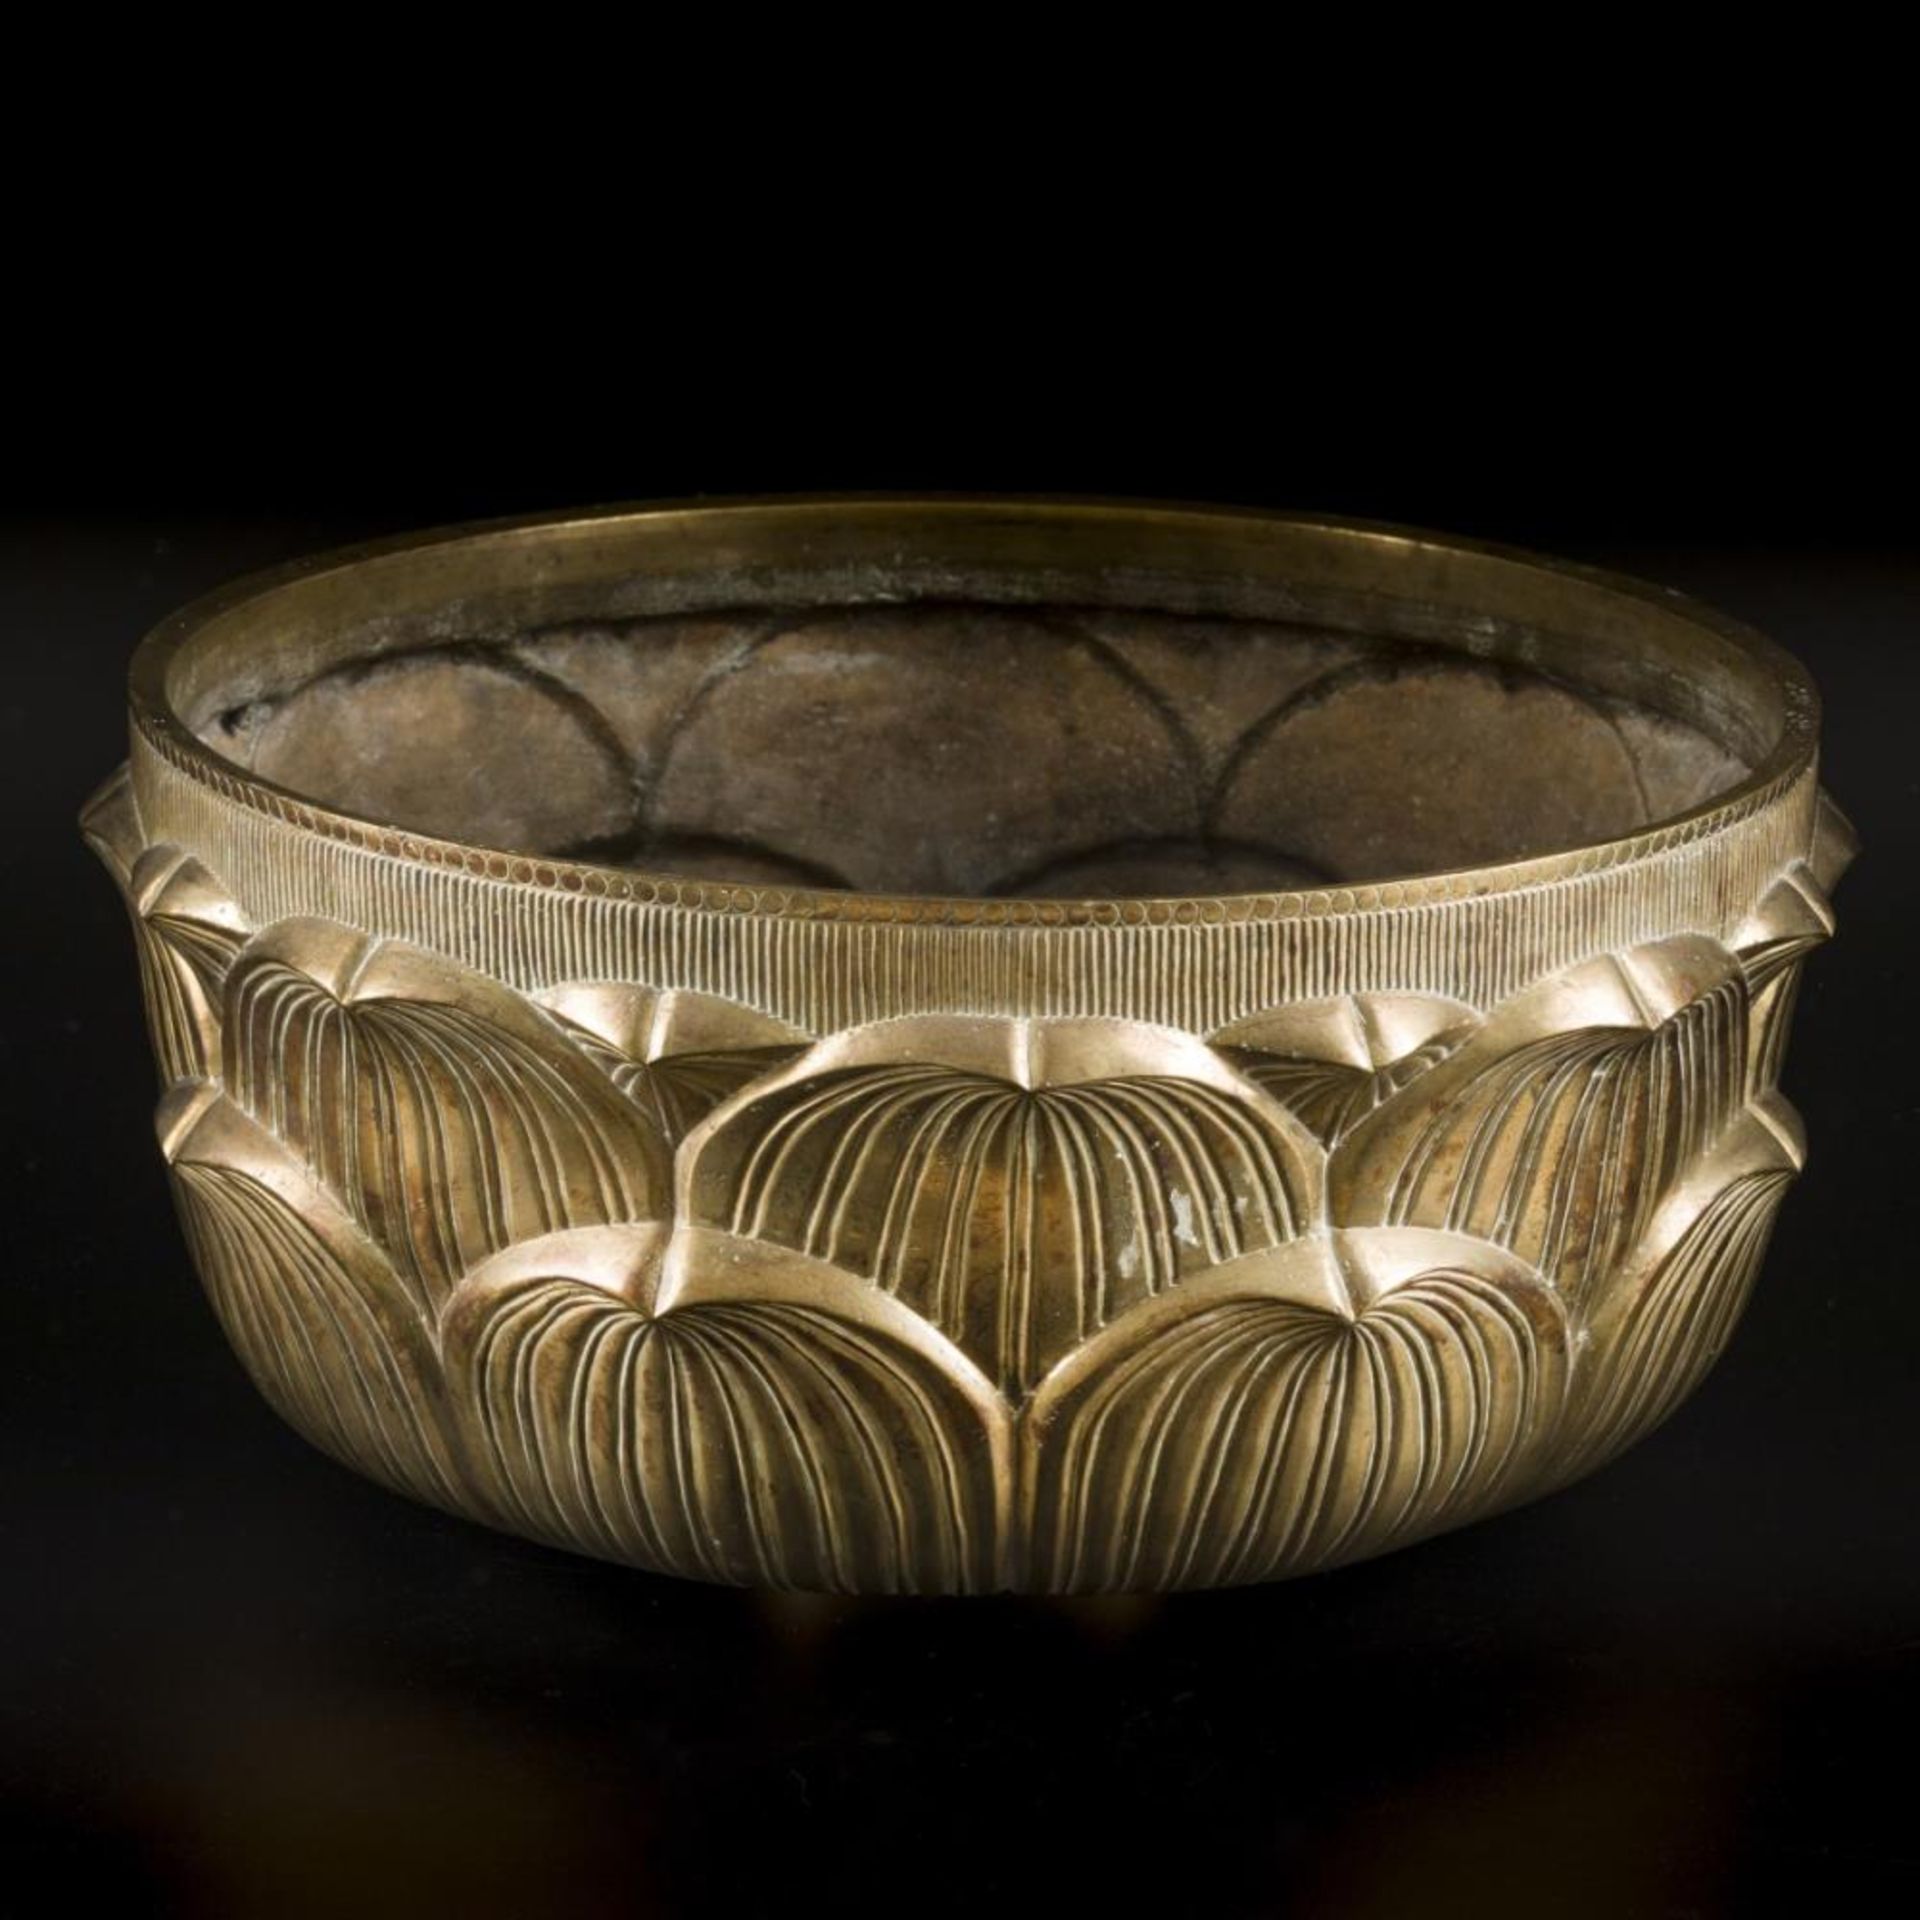 A brass lotus-shaped bowl, China, early 20th century.